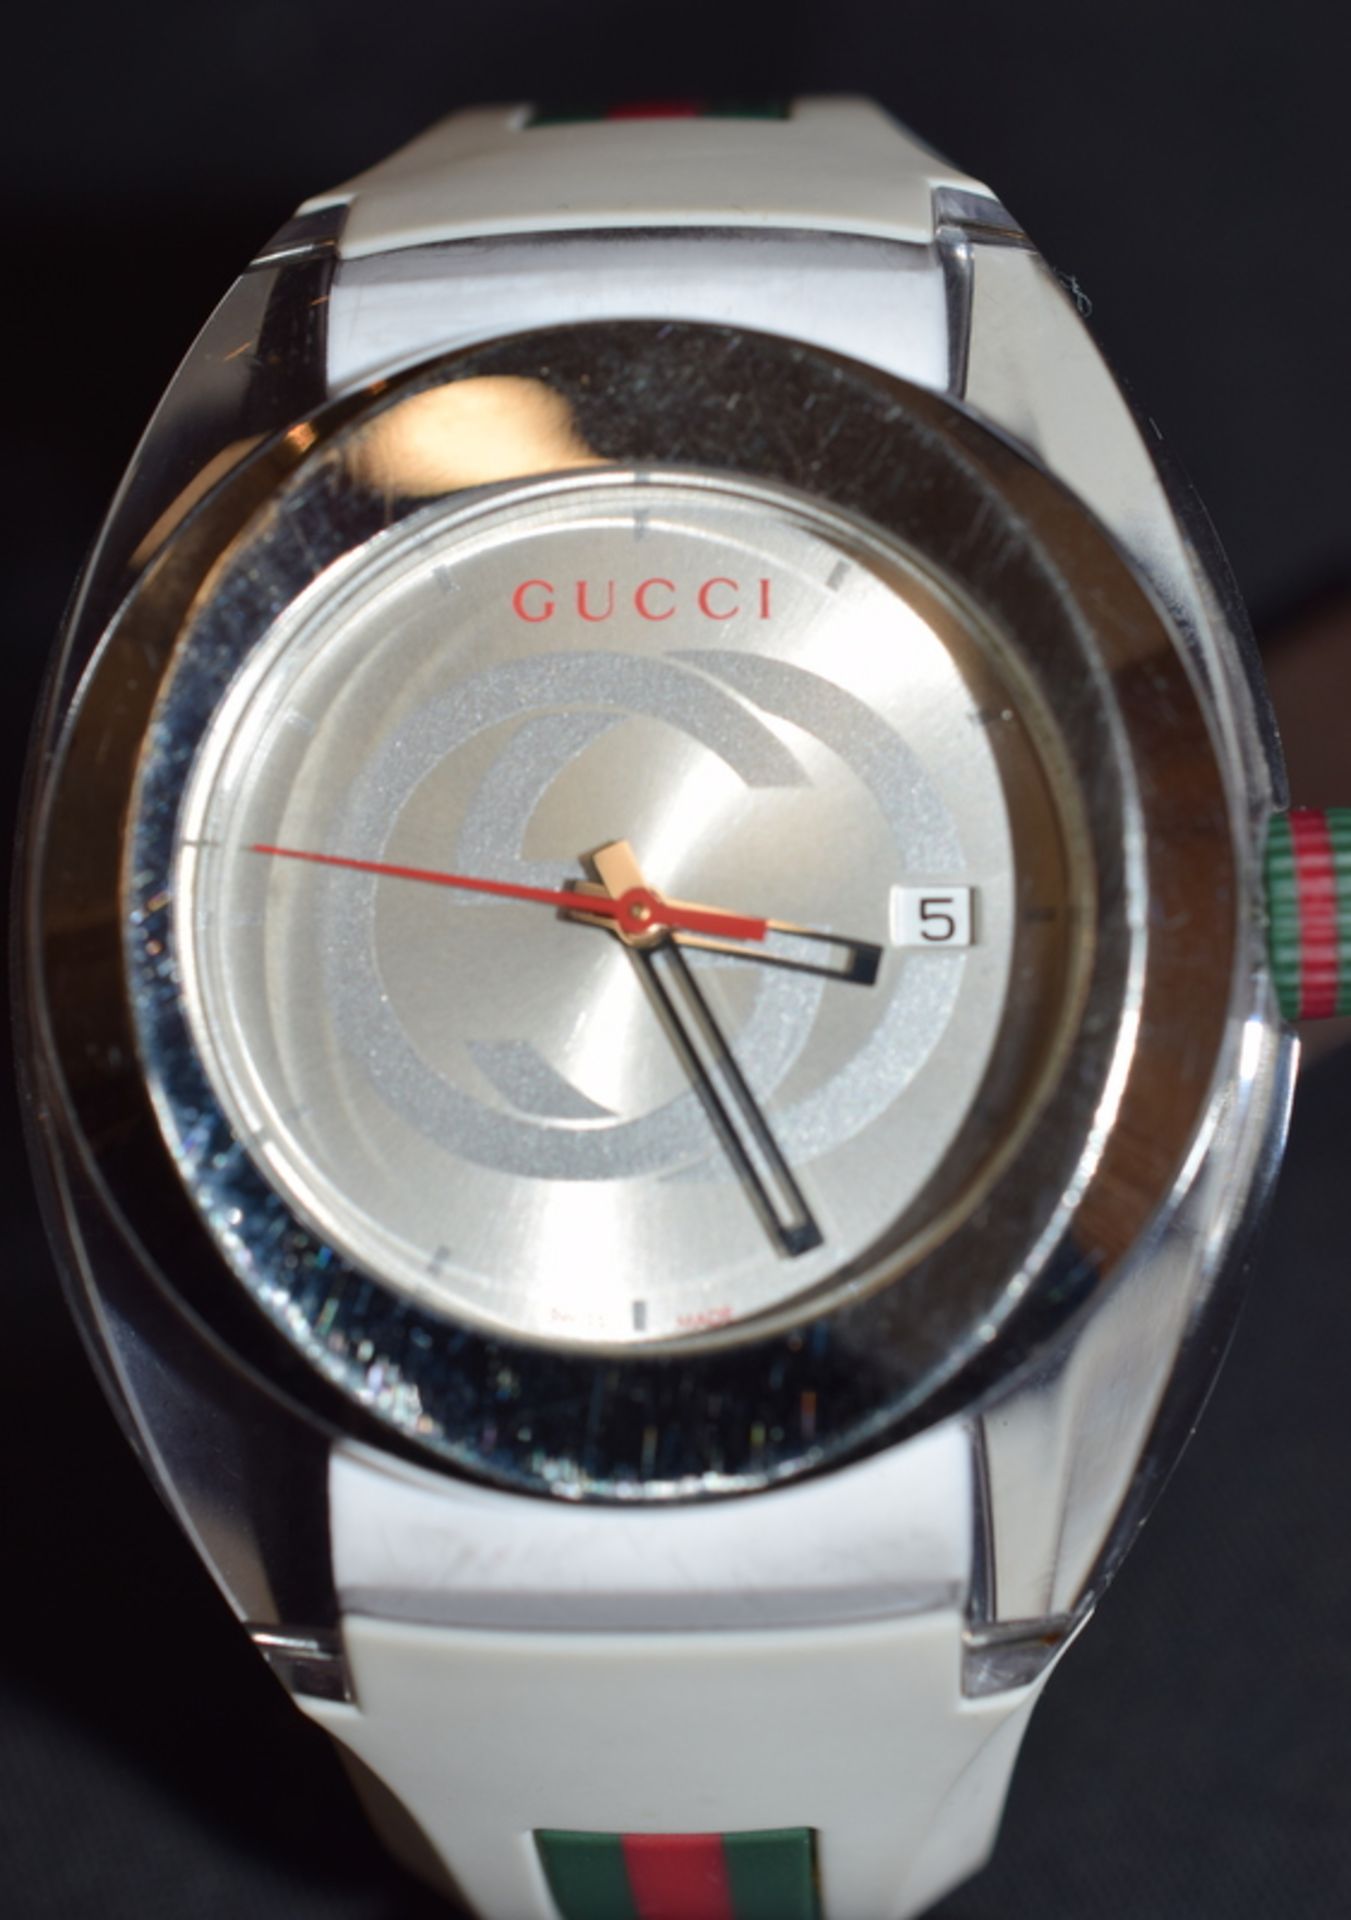 Gucci 137.1 Sync Watch With Italian Colours - Image 2 of 6